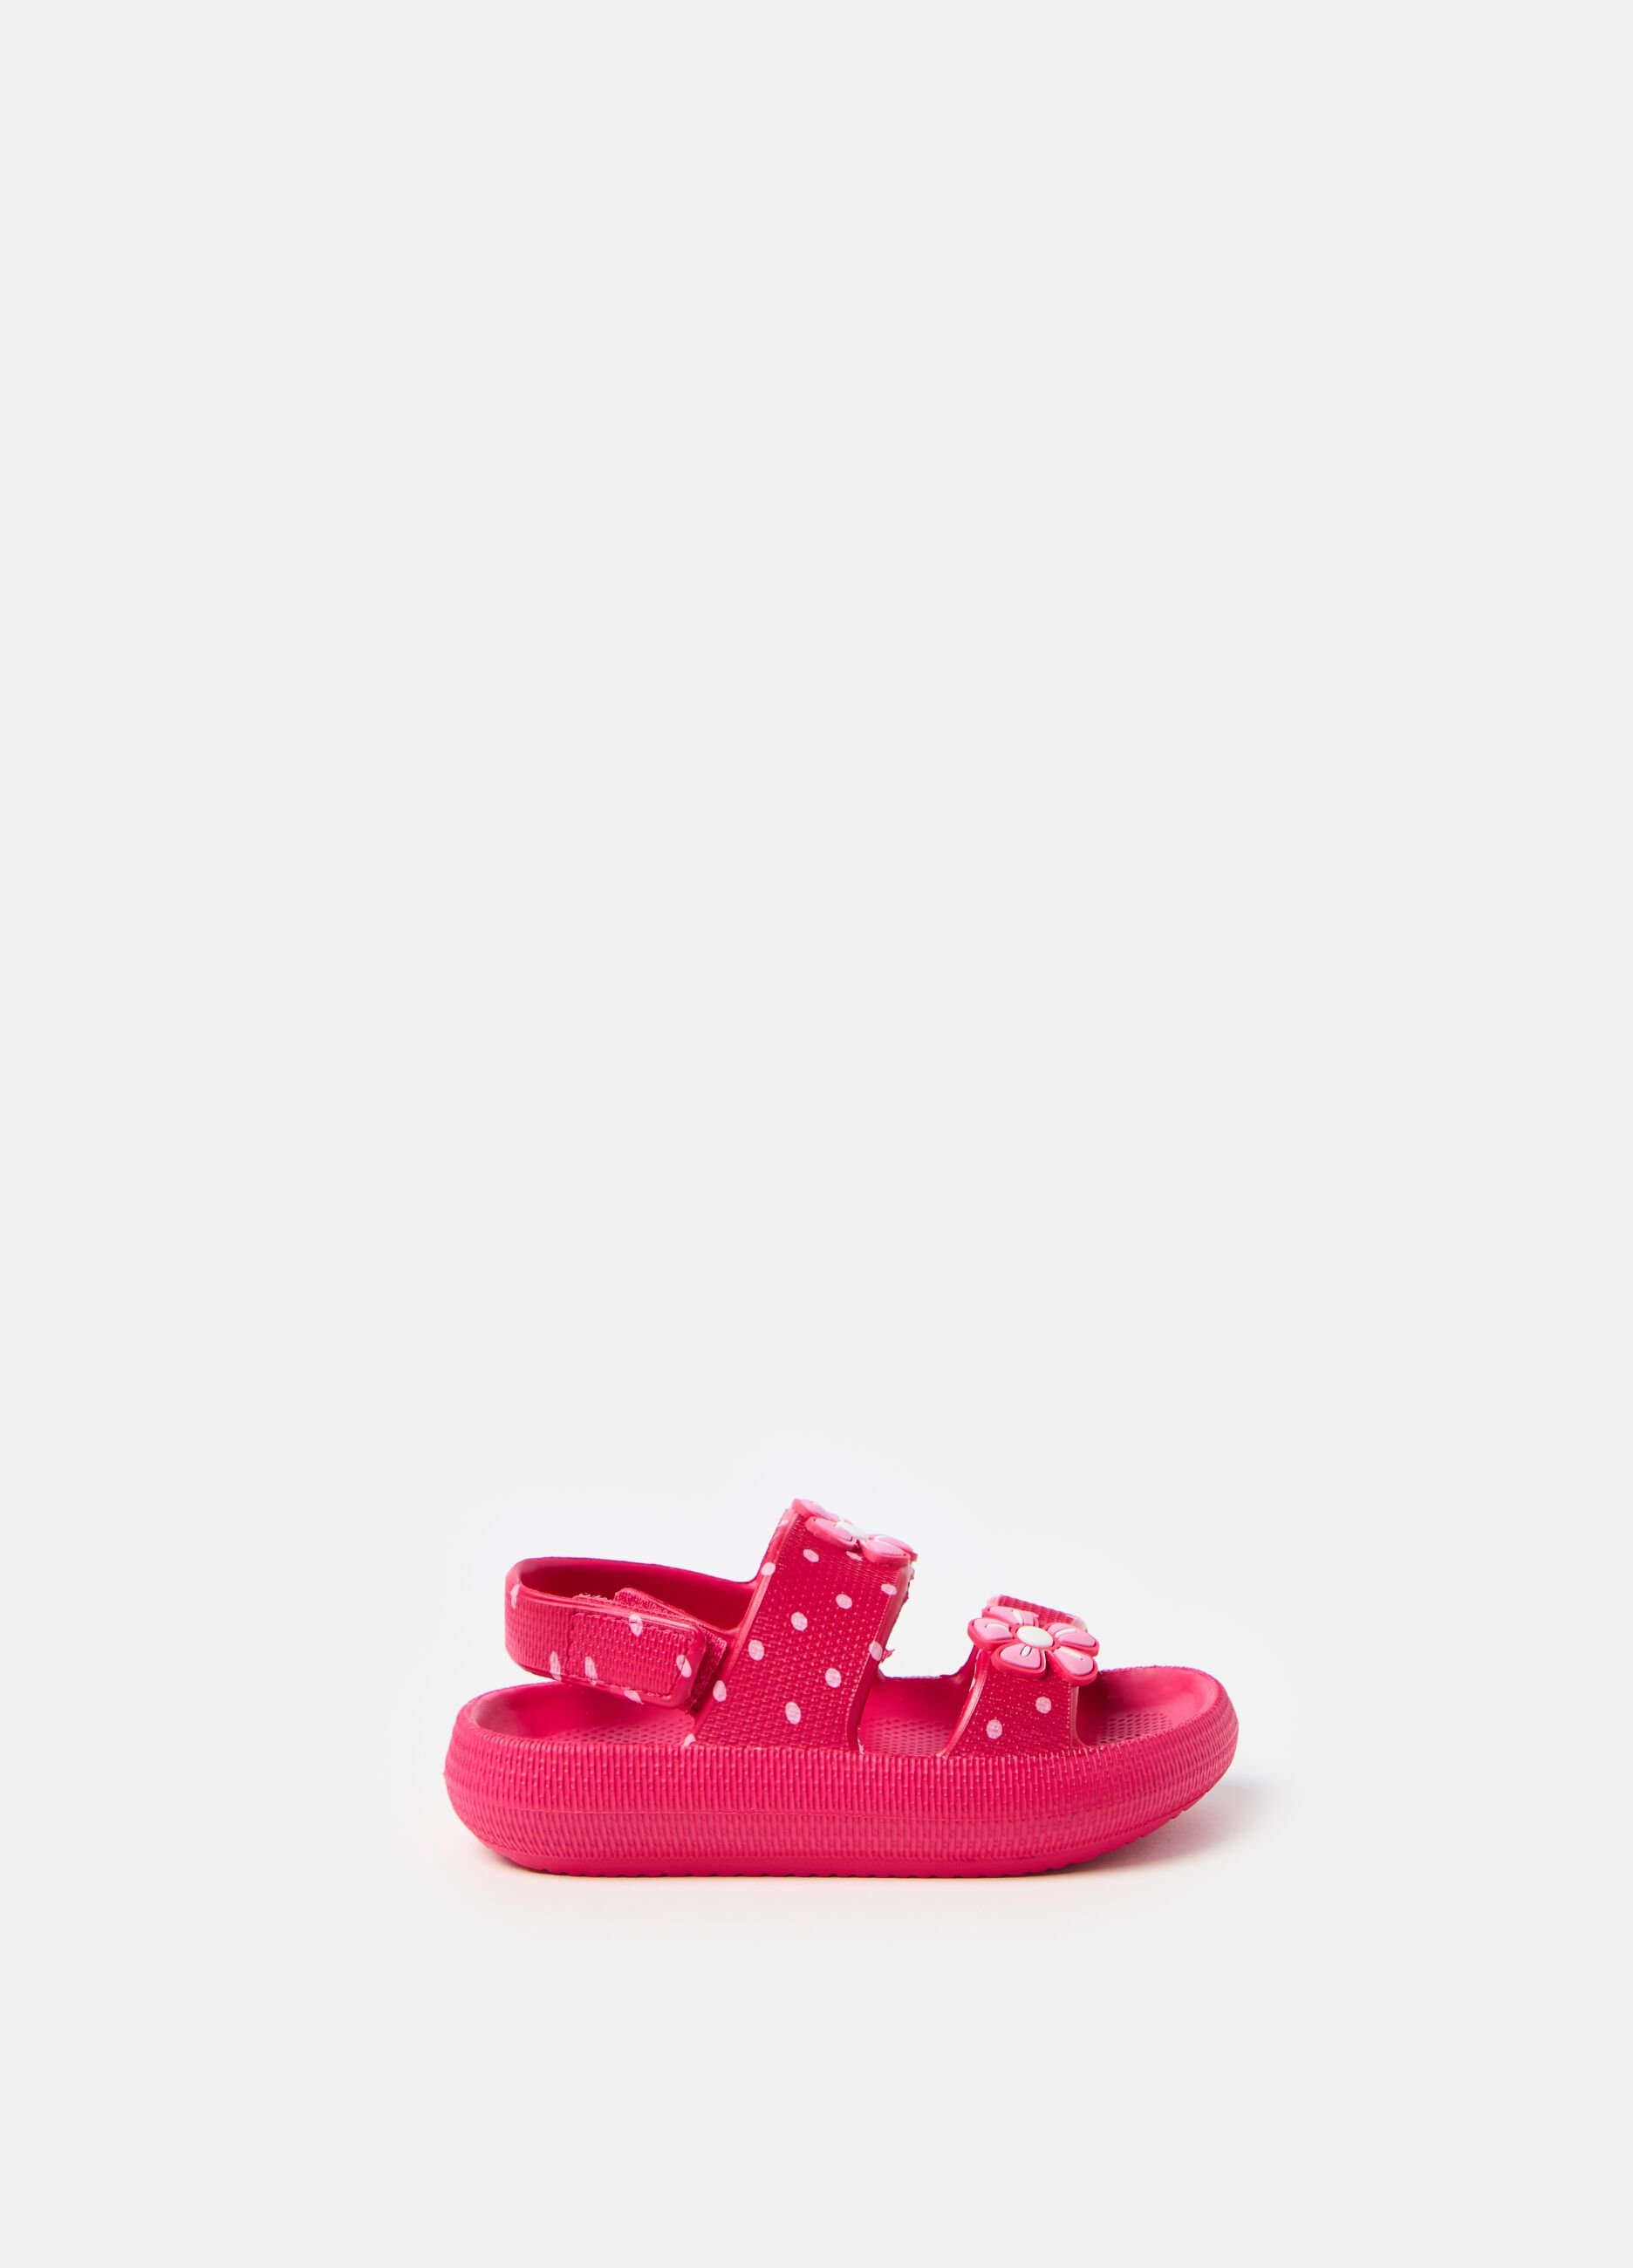 Thong sandals with small flowers